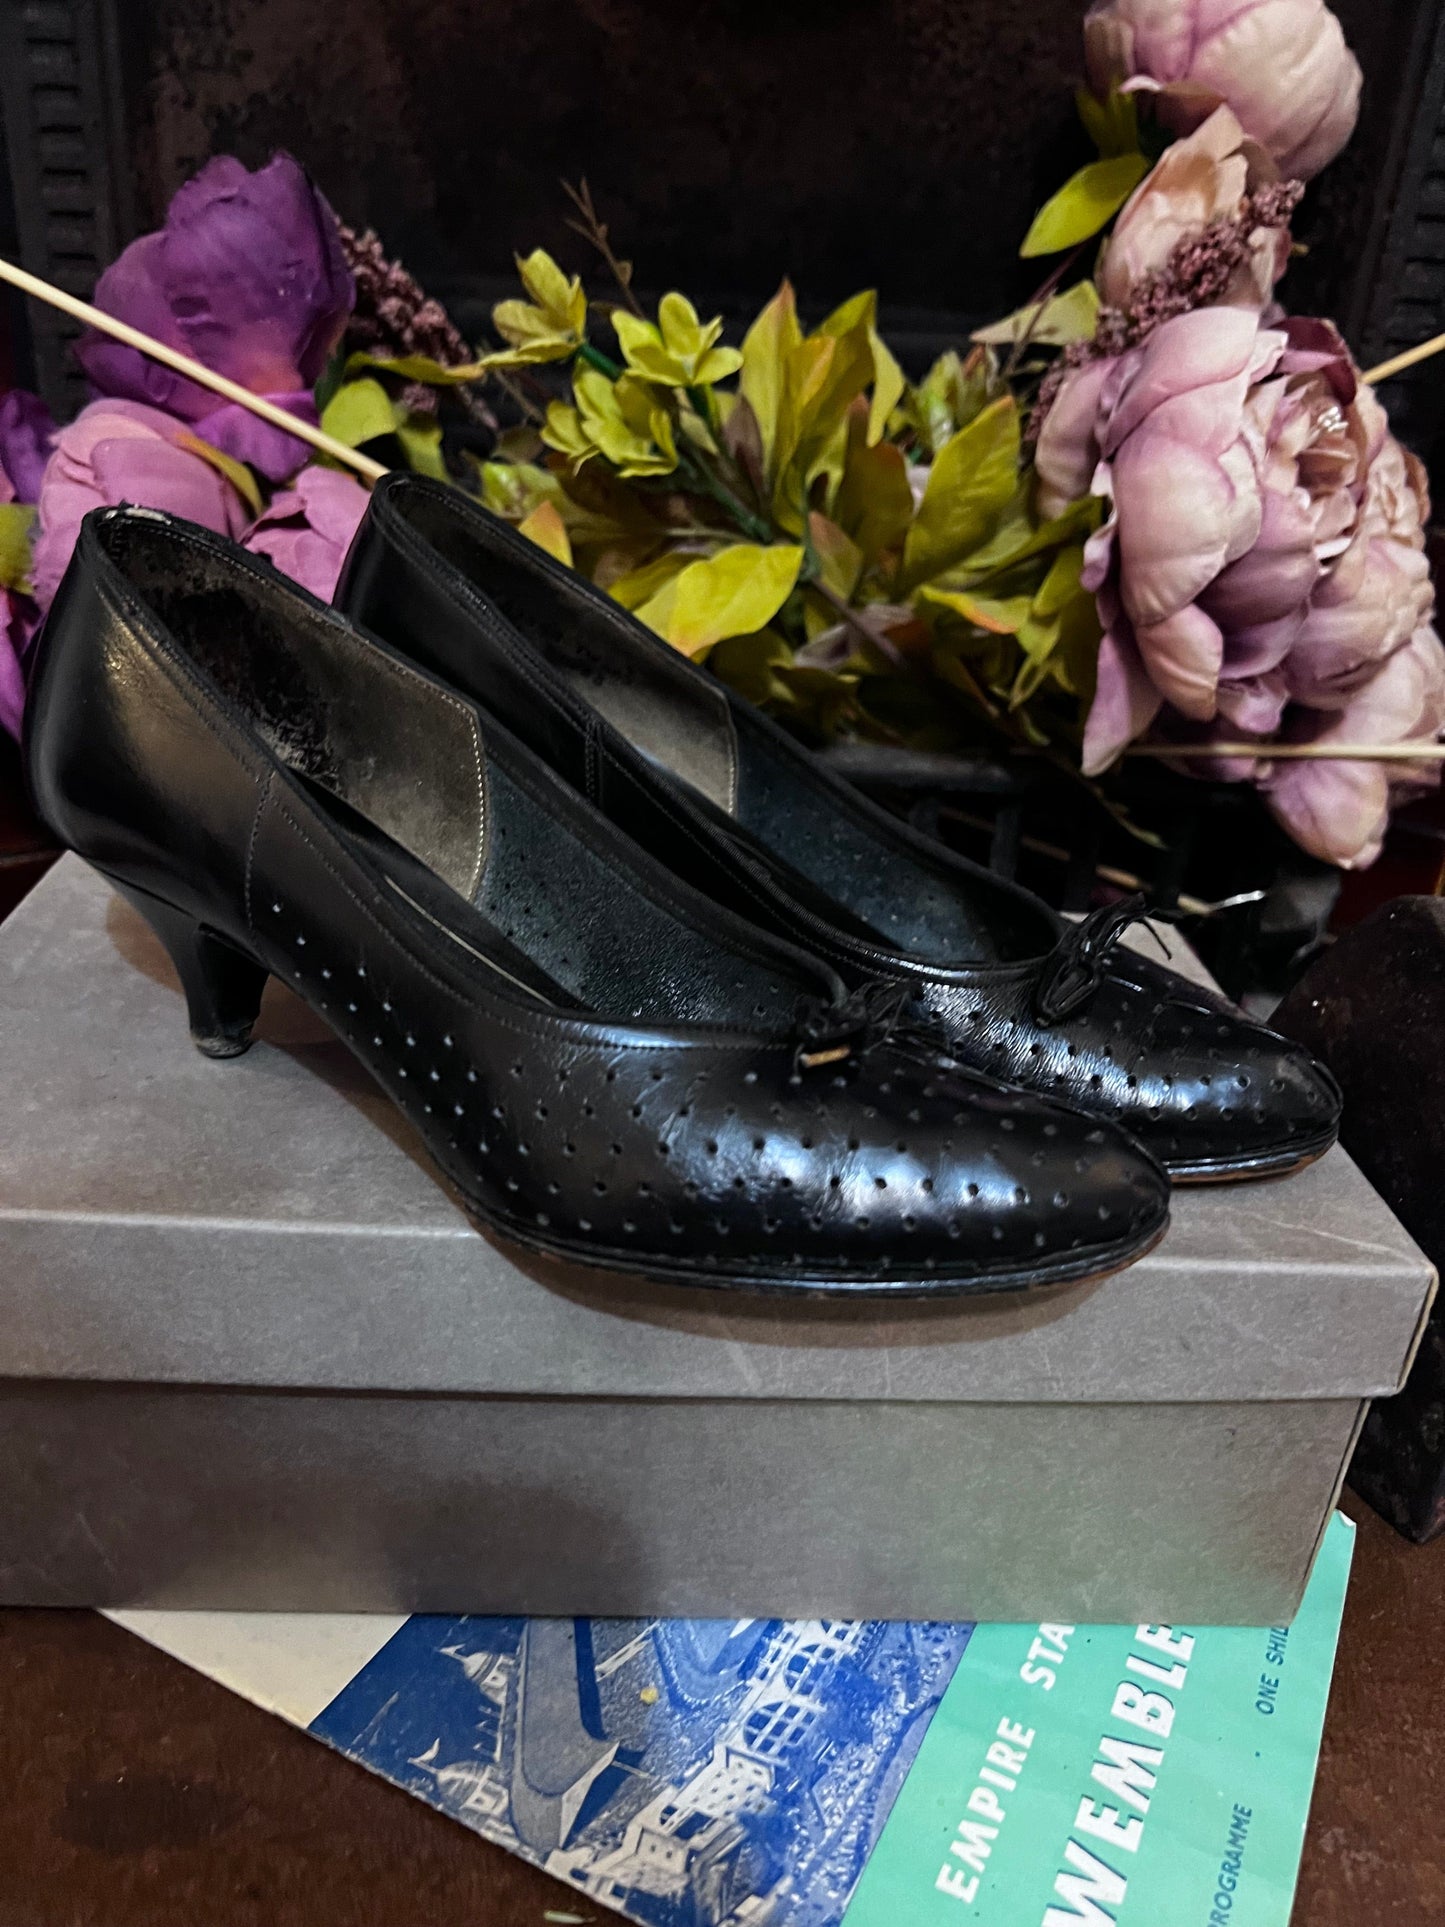 70s Black Shoes leather Pointed Shoes Black Kid leather, Vintage Vintage Shoes, 70s Shoes, vintage shoes & box UK2.5, re-soled reheel needed